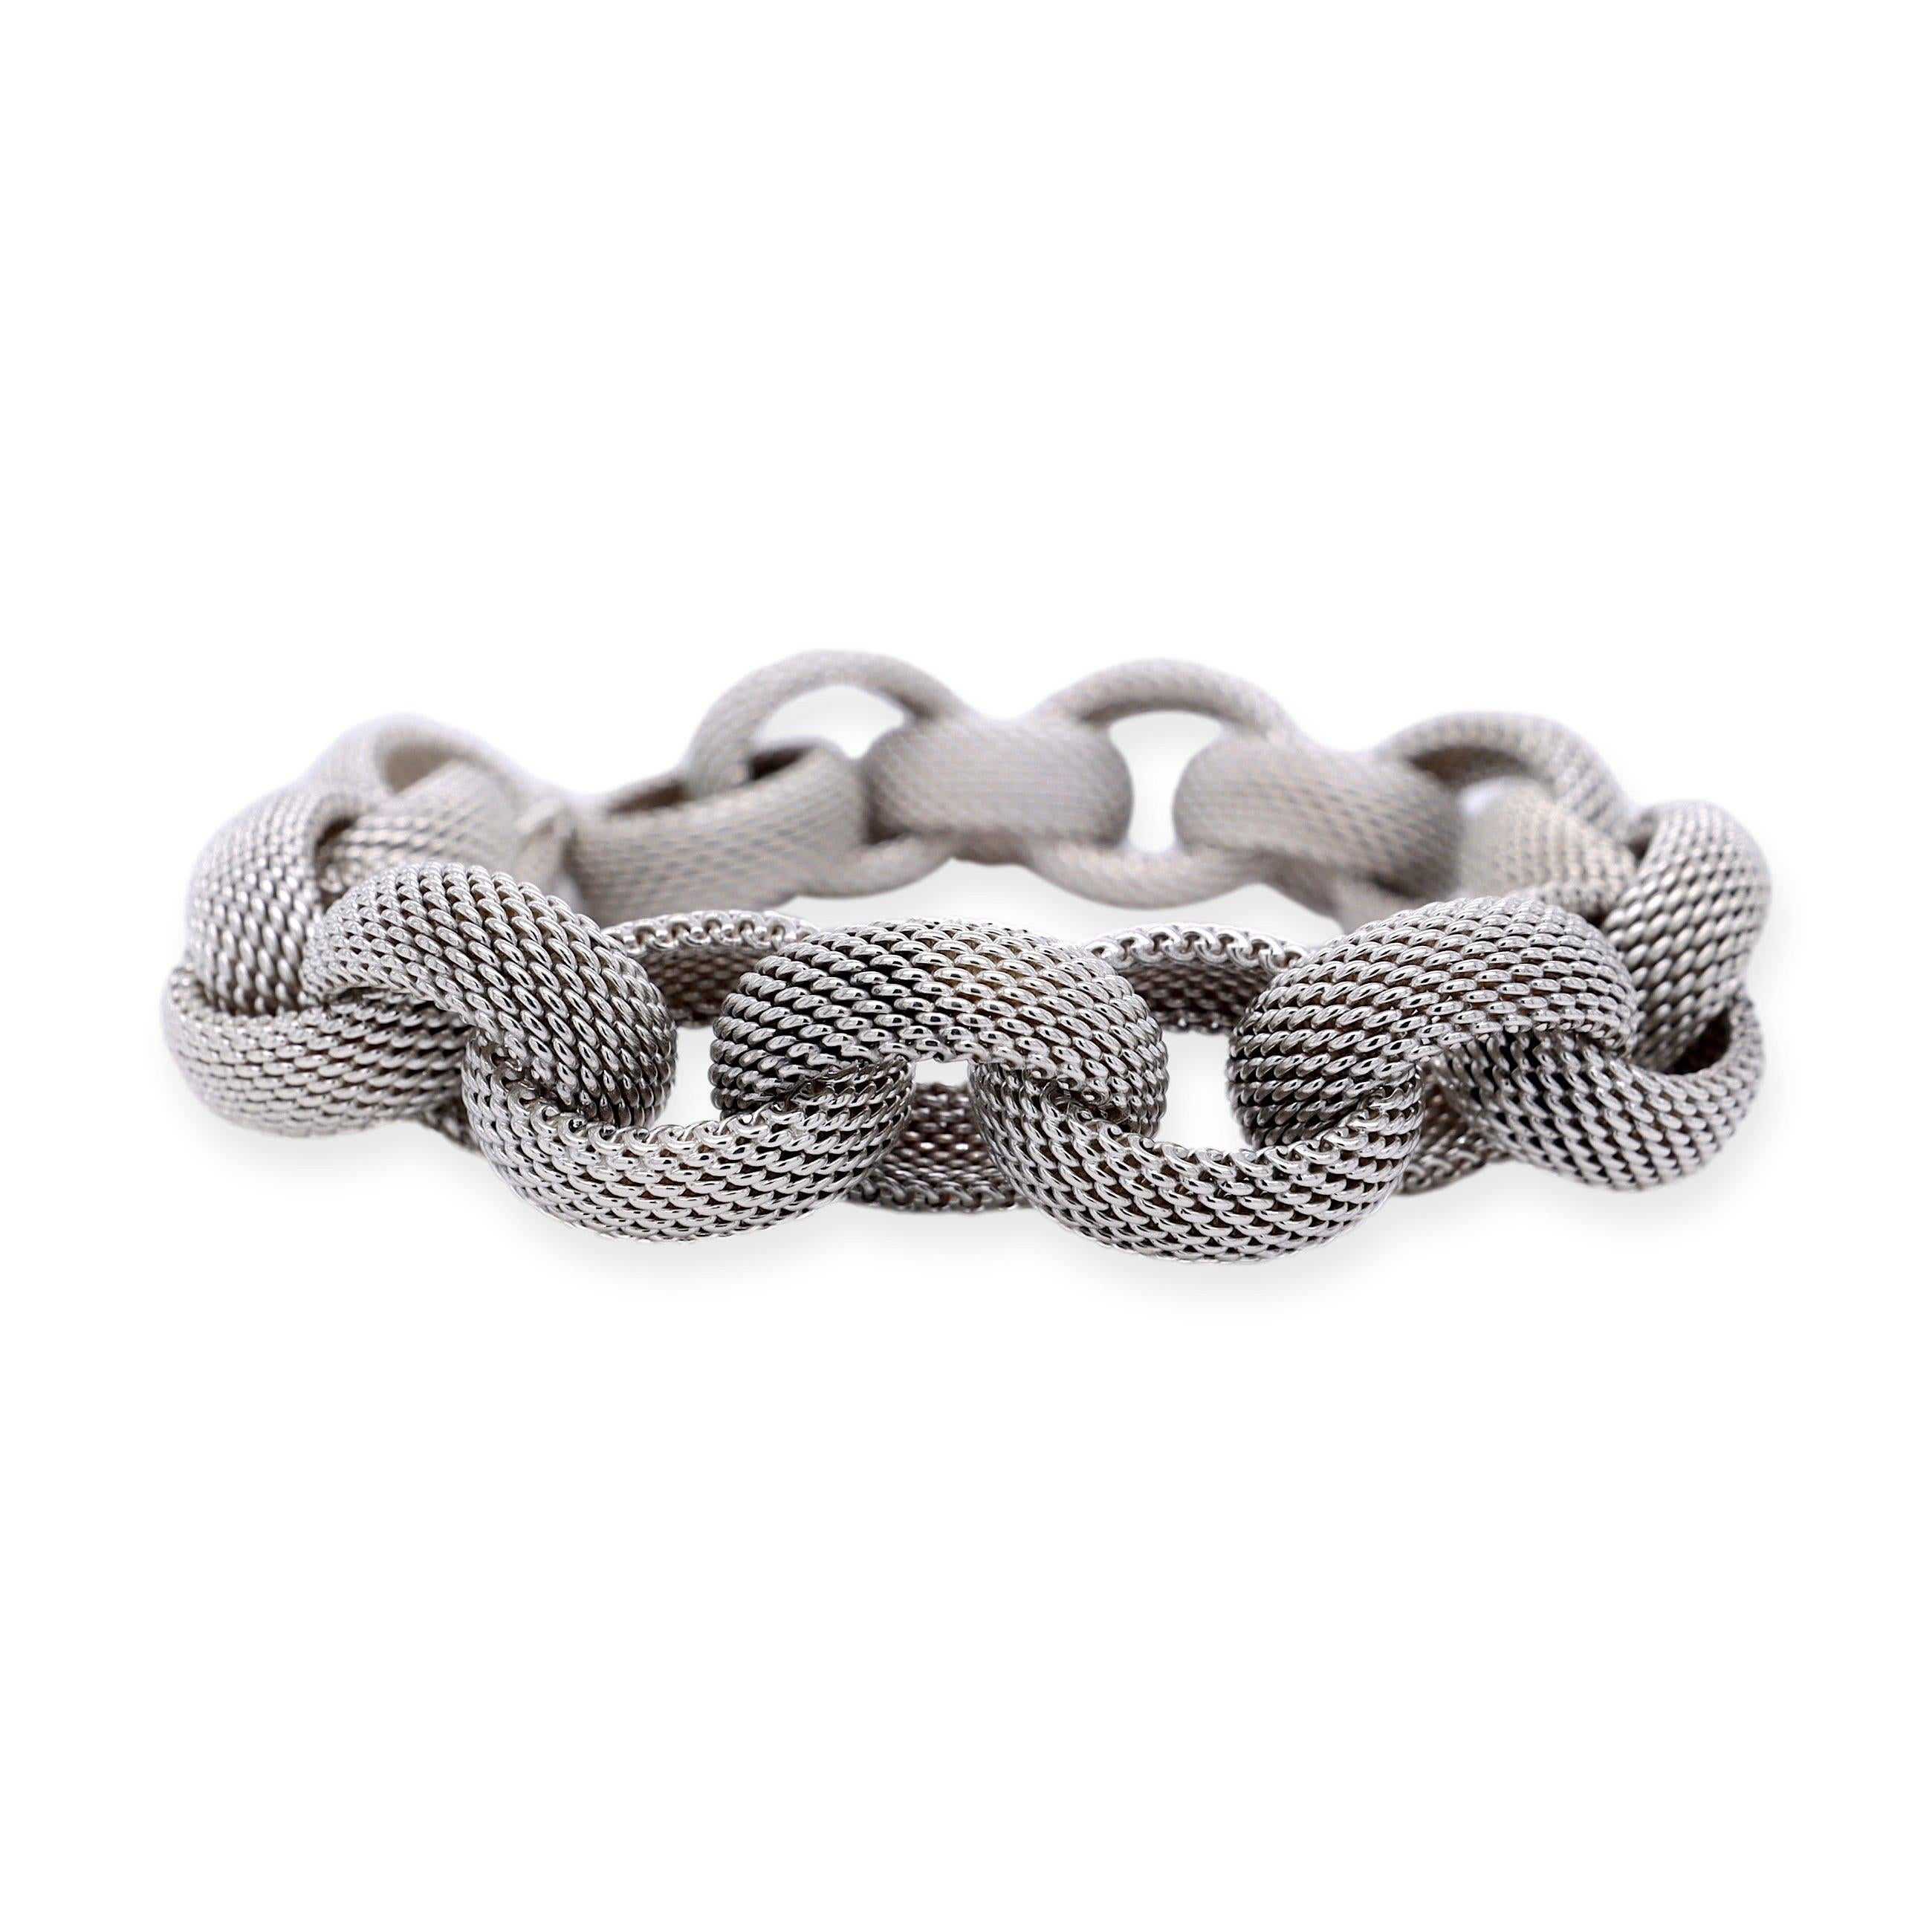 Tiffany & Co. Link Somerset Toggle Bracelet is an exquisite piece of jewelry crafted with the finest quality sterling silver. The bracelet features interlocking woven mesh oval links, beautifully designed to create an elegant and sophisticated look.